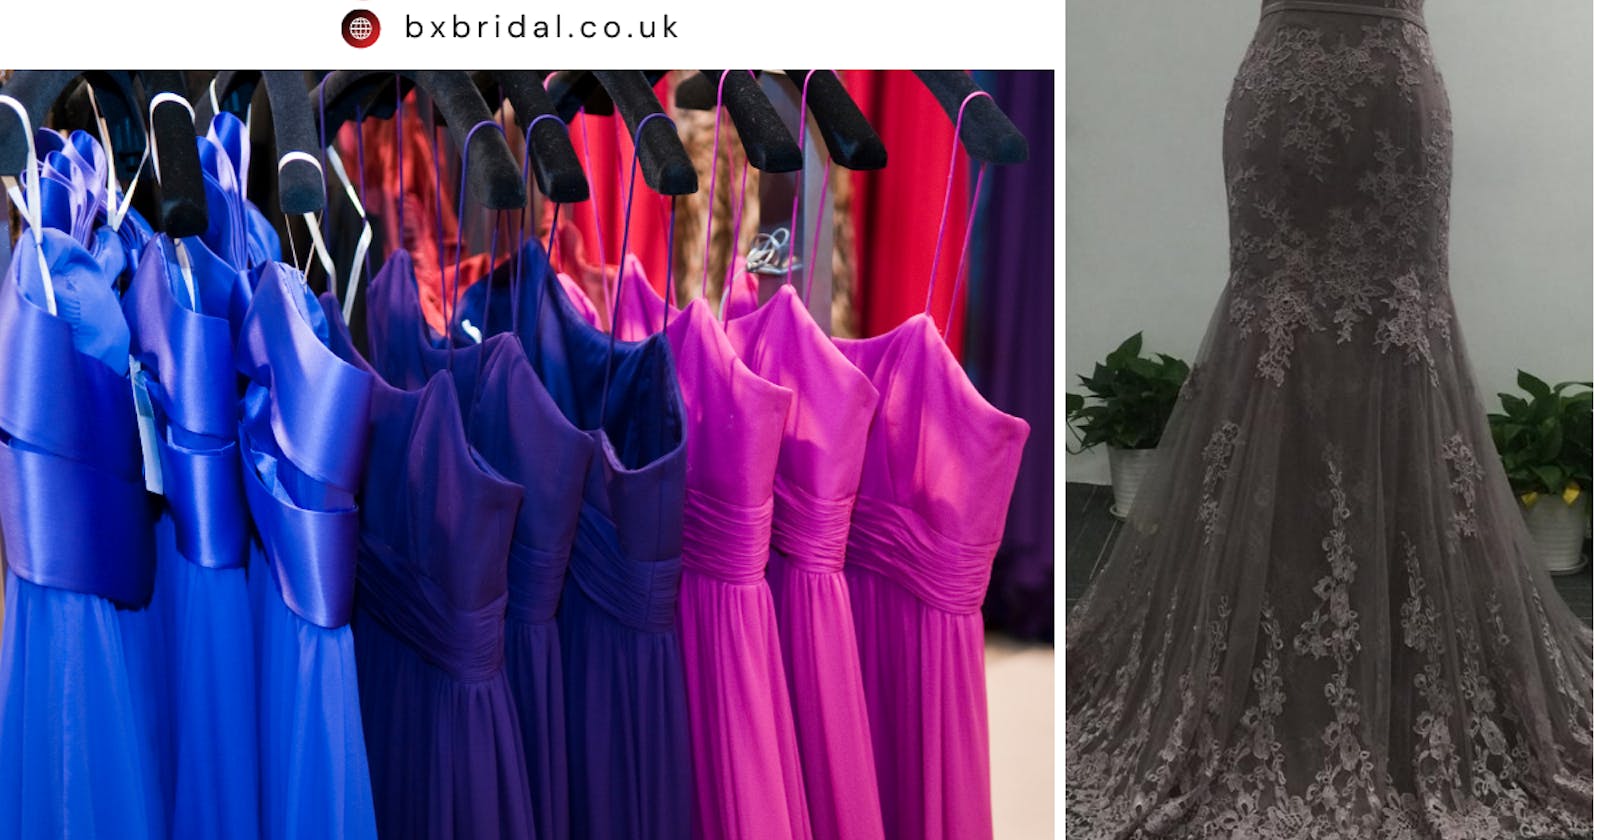 3 Things to Consider When Buying Prom Dress and Custom Bridesmaid Dress